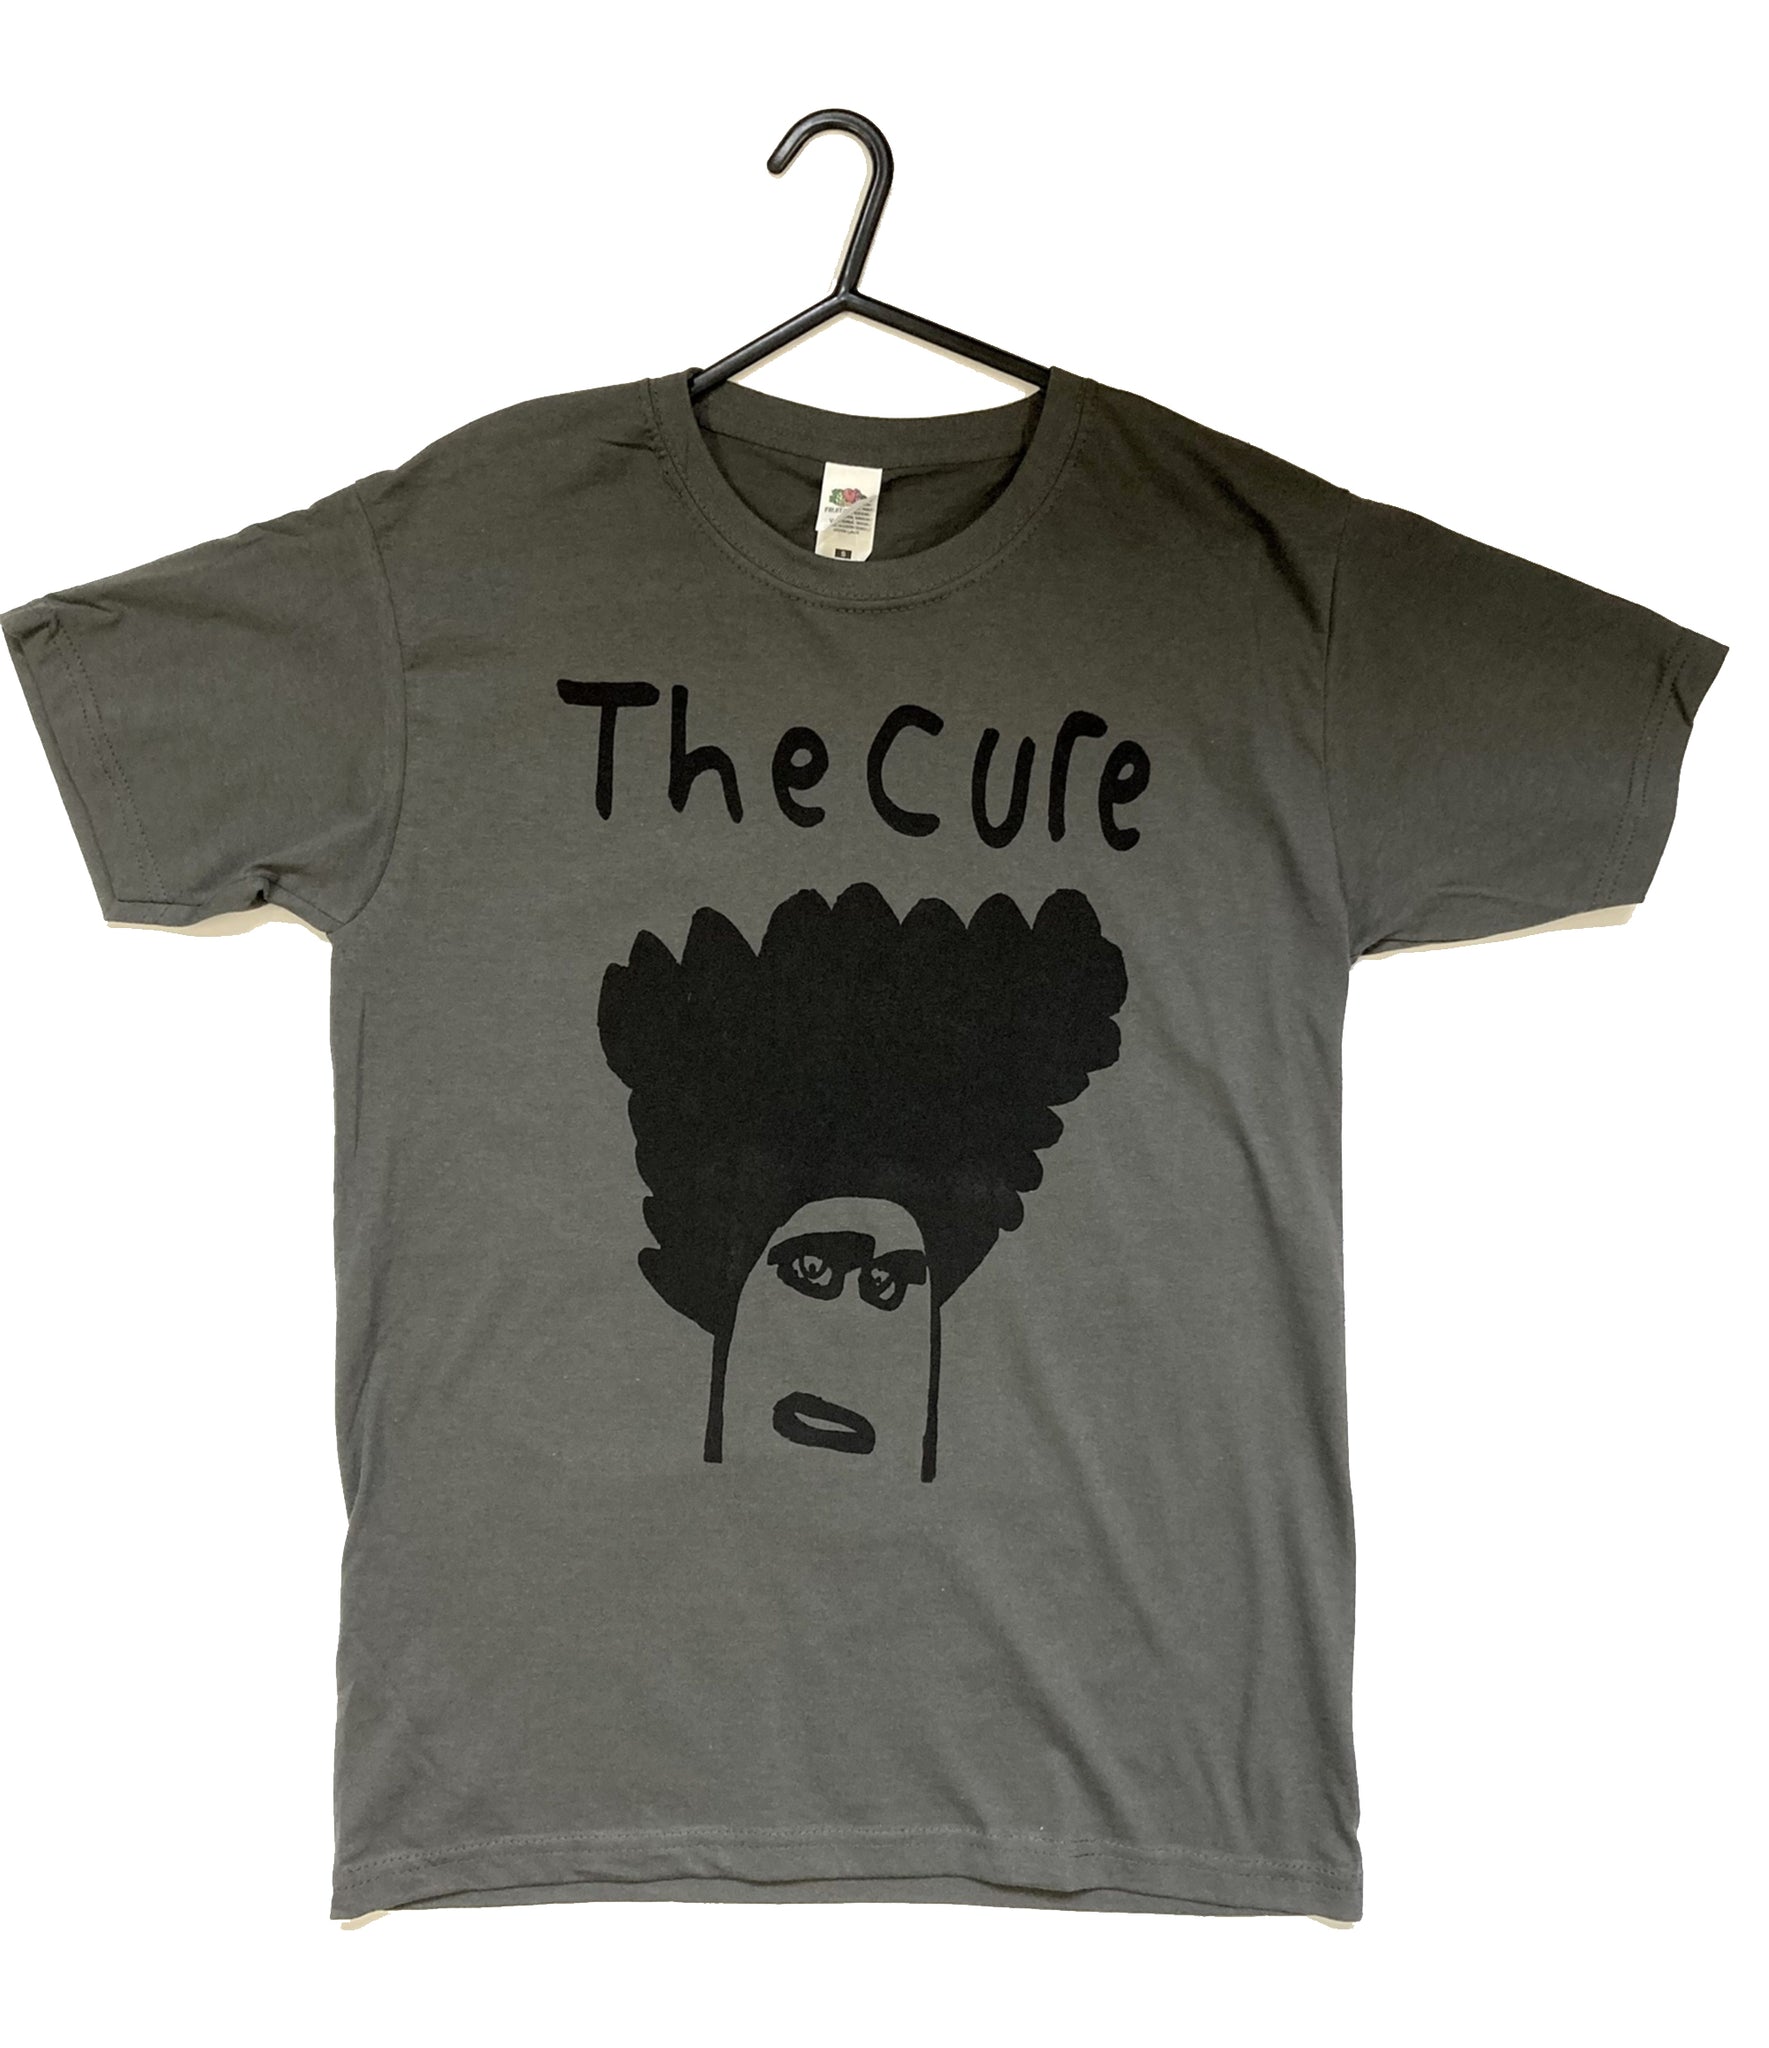 The Cure grey adult t-shirt – Inspired